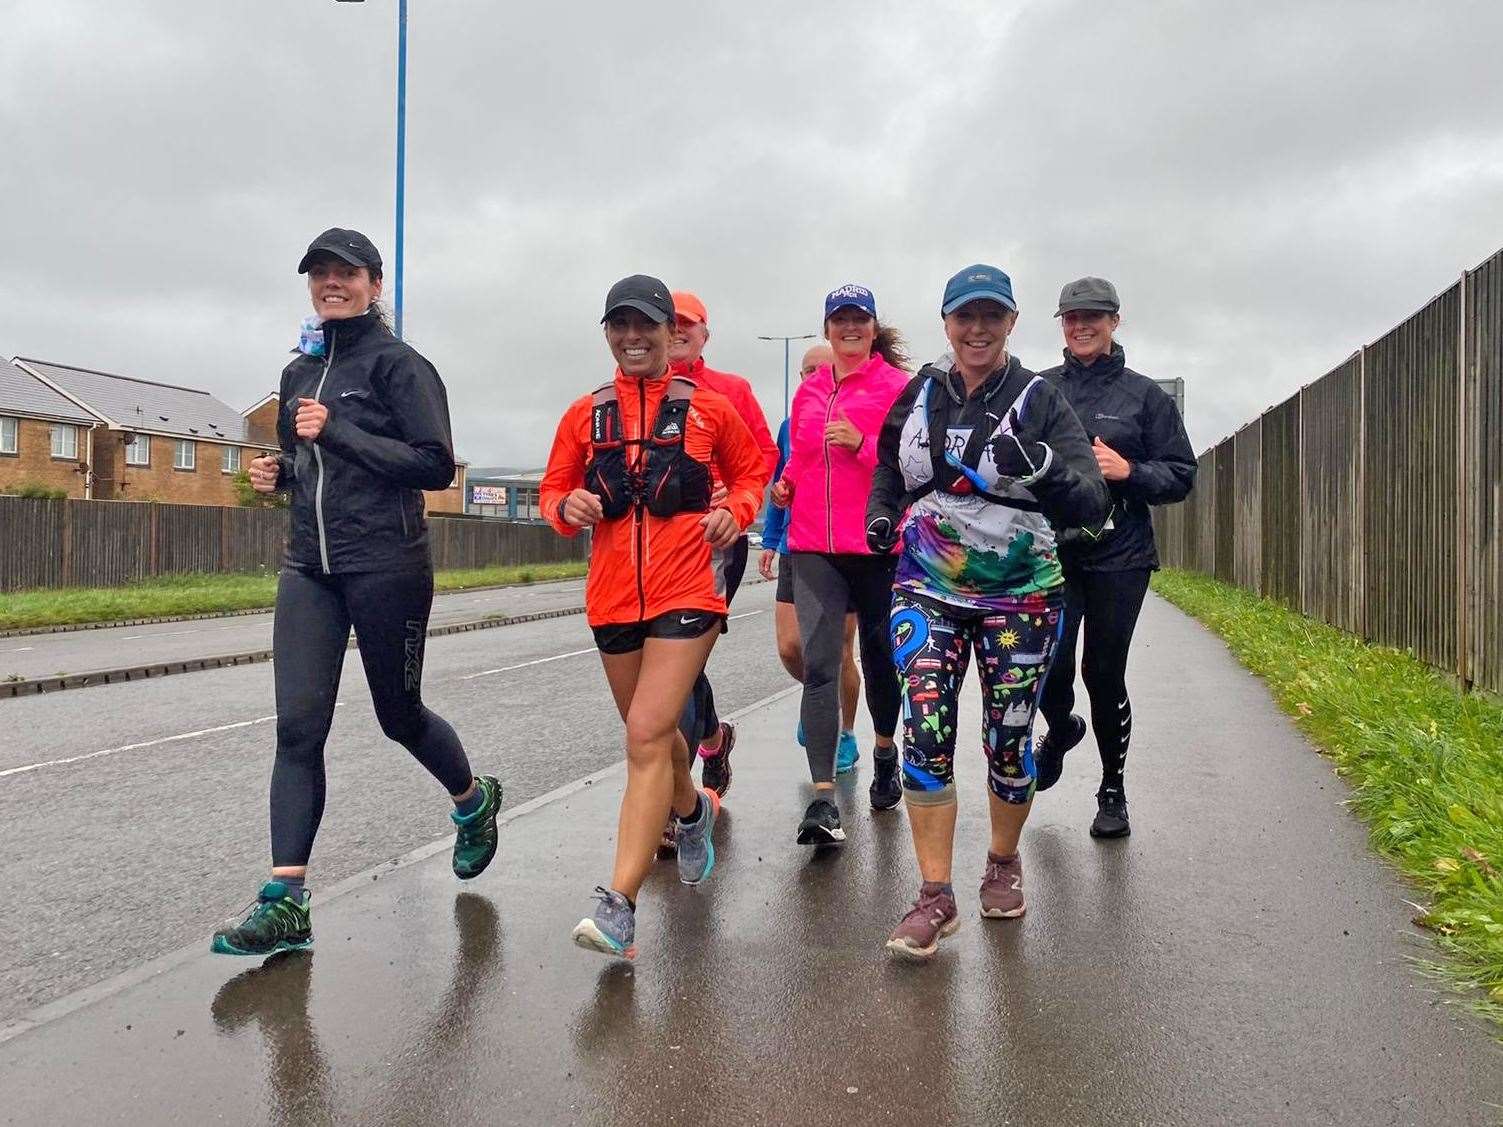 Andrea Bradley (second right) completing the 2020 virtual London Marathon in Neath, Wales (Family handout/PA)